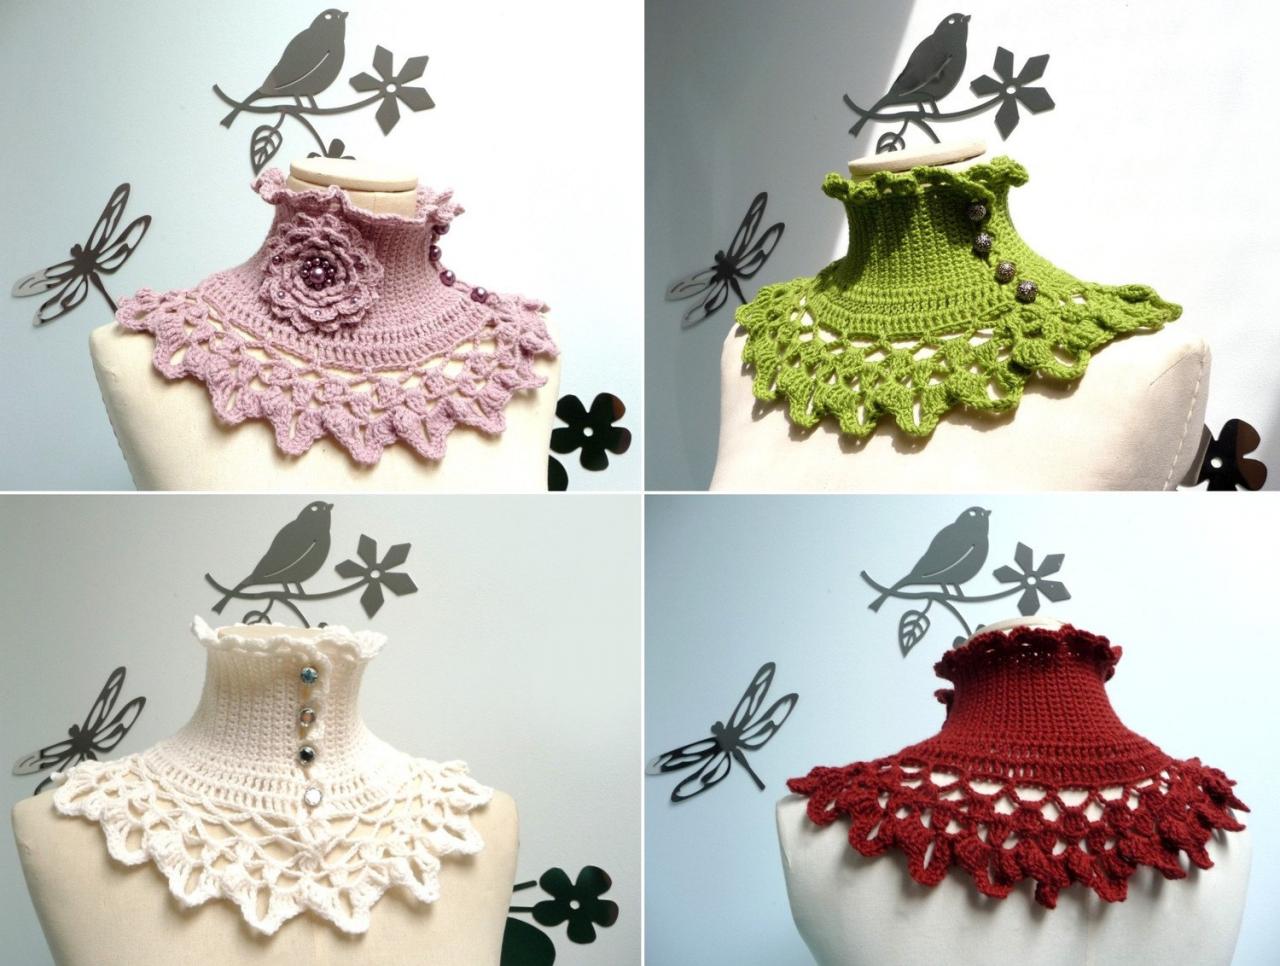 Crochet Neckwarmer / Collar With Turtleneck, Ruffle Neckline And Lace Collar - Made To Order - Choose The Color - Ninu'